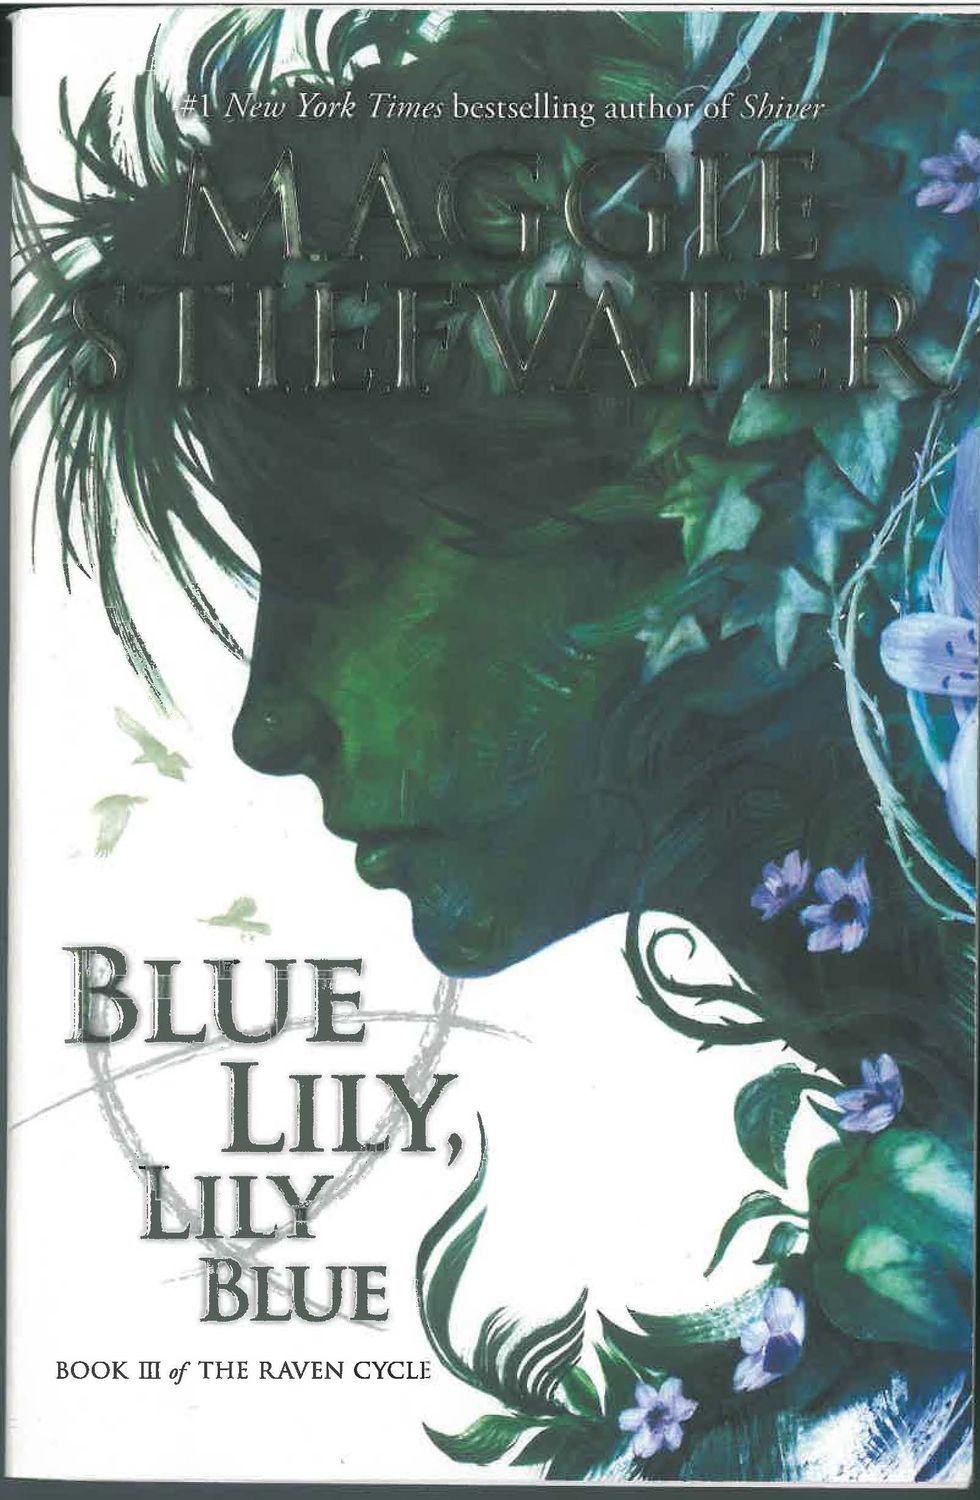 Why You Should Still Read 'Blue Lily, Lily Blue' by Maggie Stievfater.